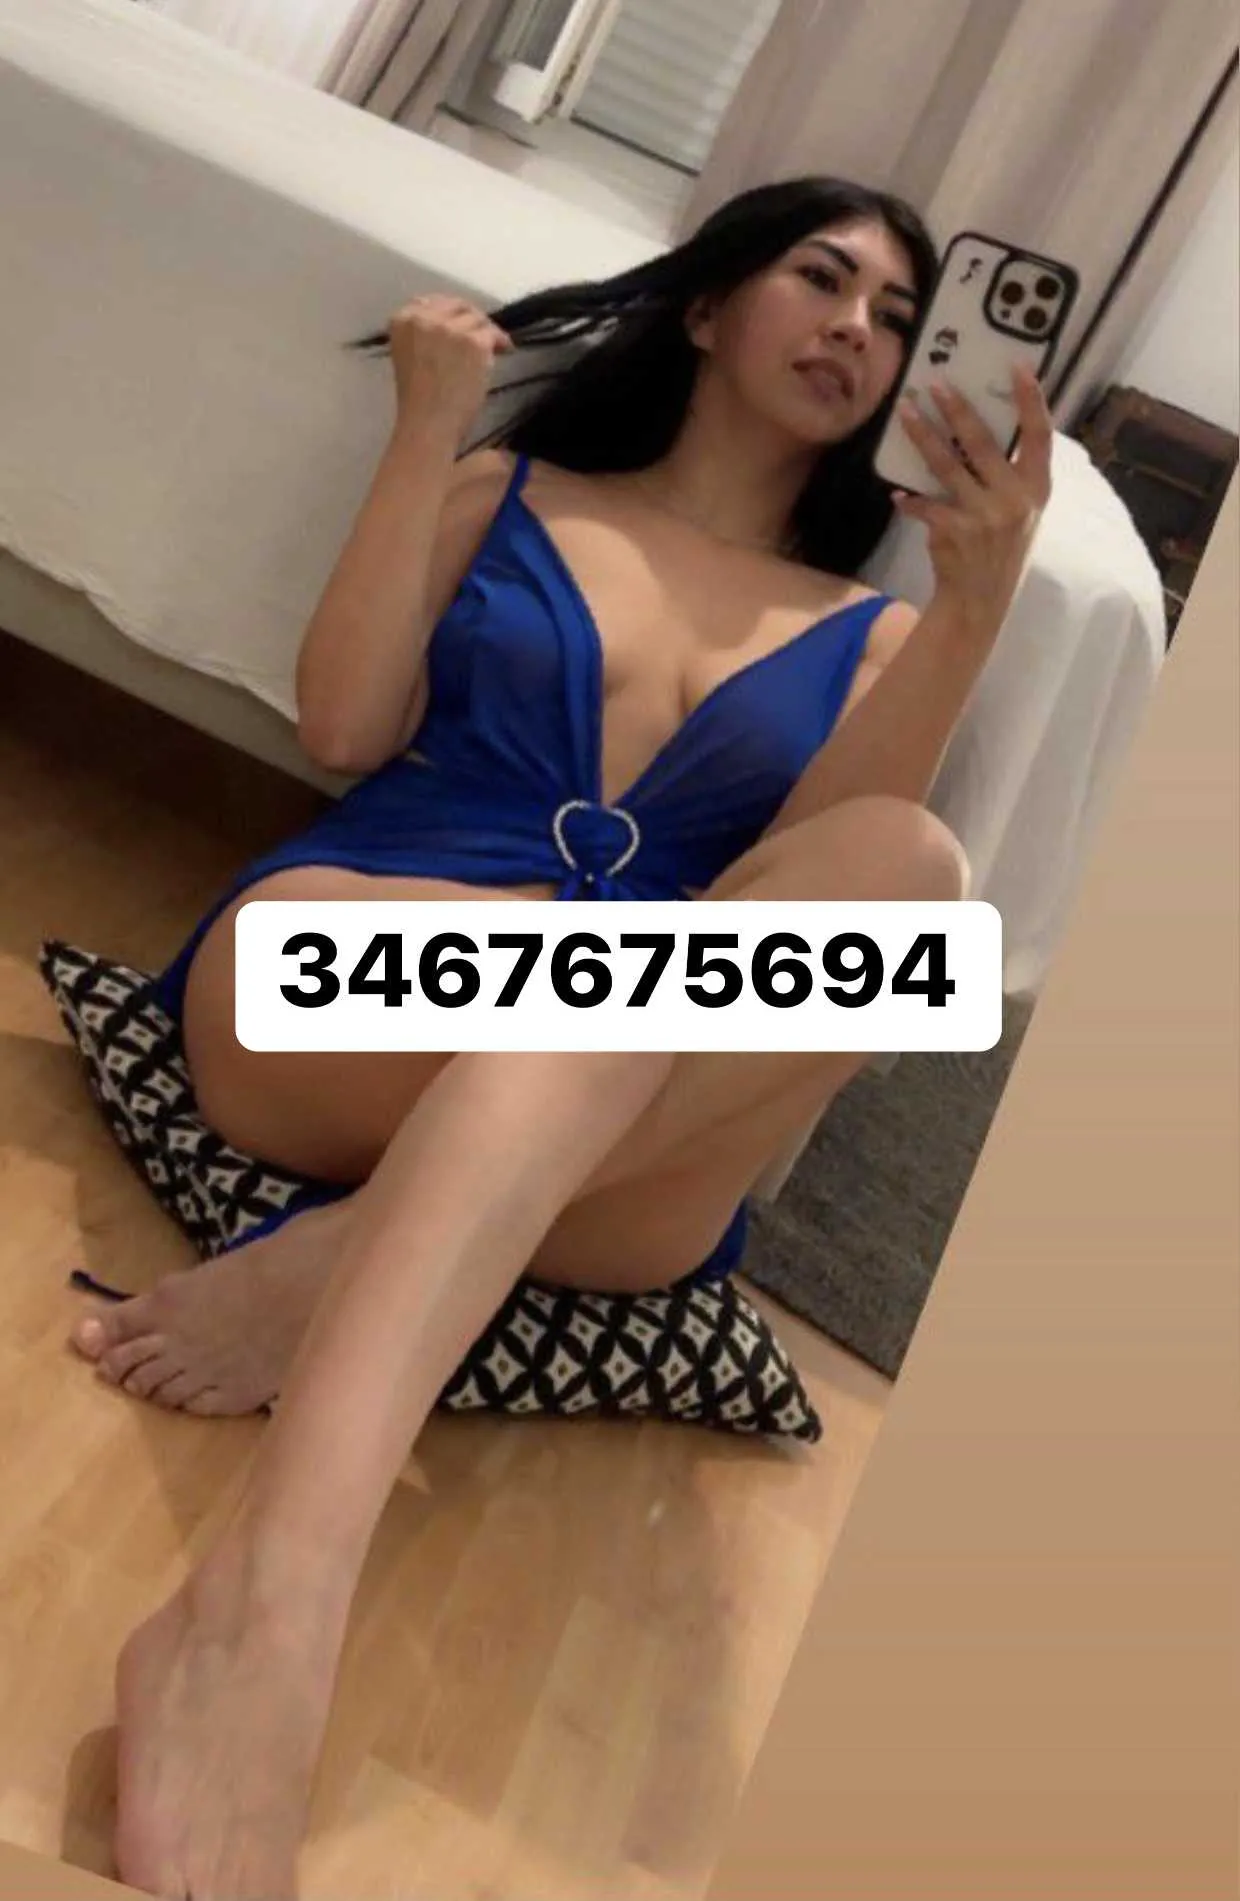 Reviews about escort with phone number 3467675694